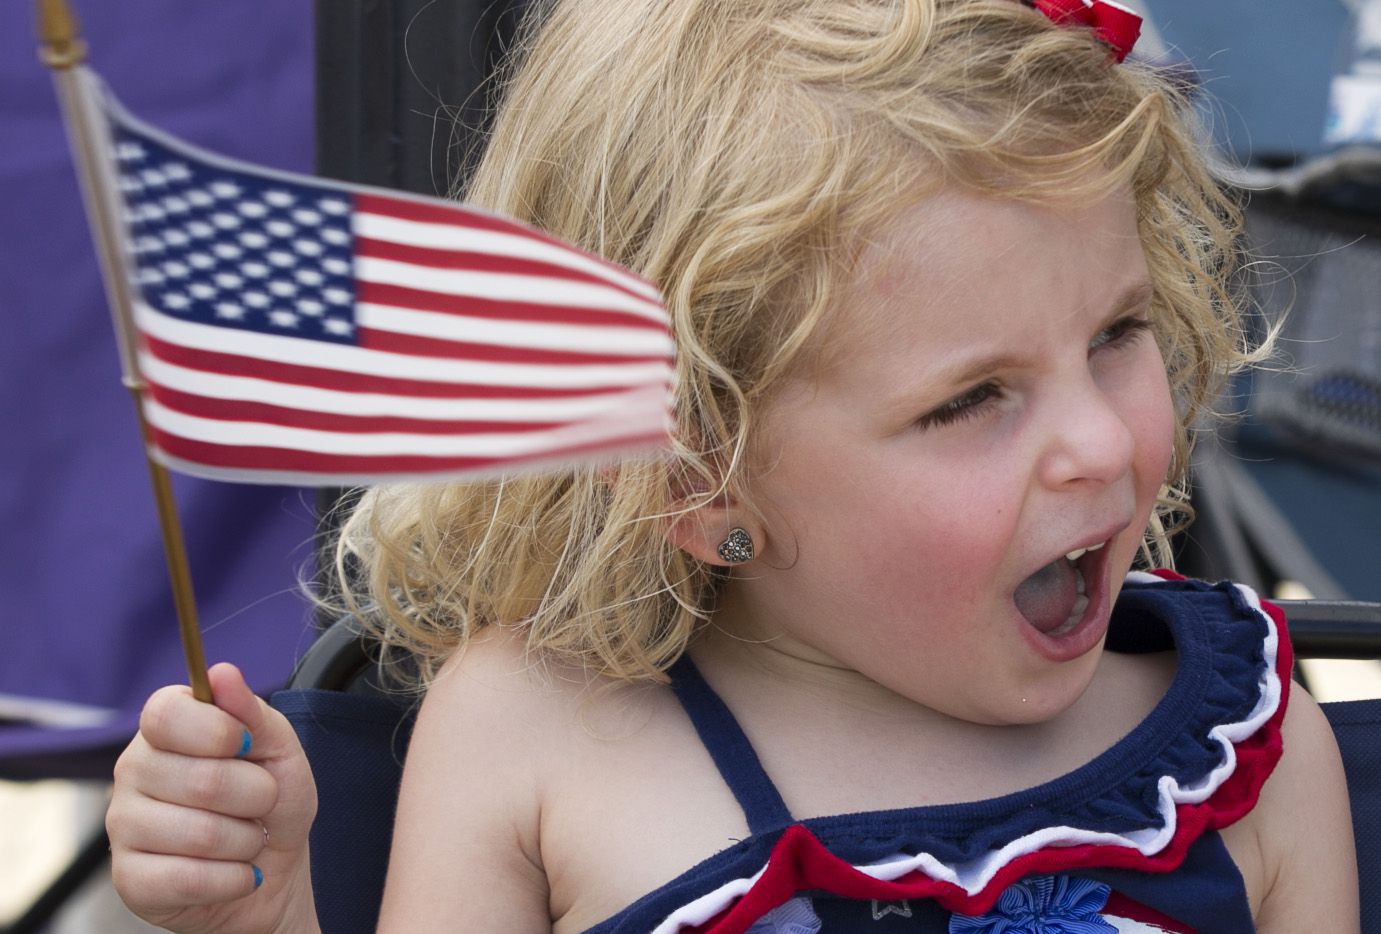 Katie Shearer, 4, of Arlington waves her flag as she watches the Arlington Fourth of July parade in downtown Arlington in 2014.